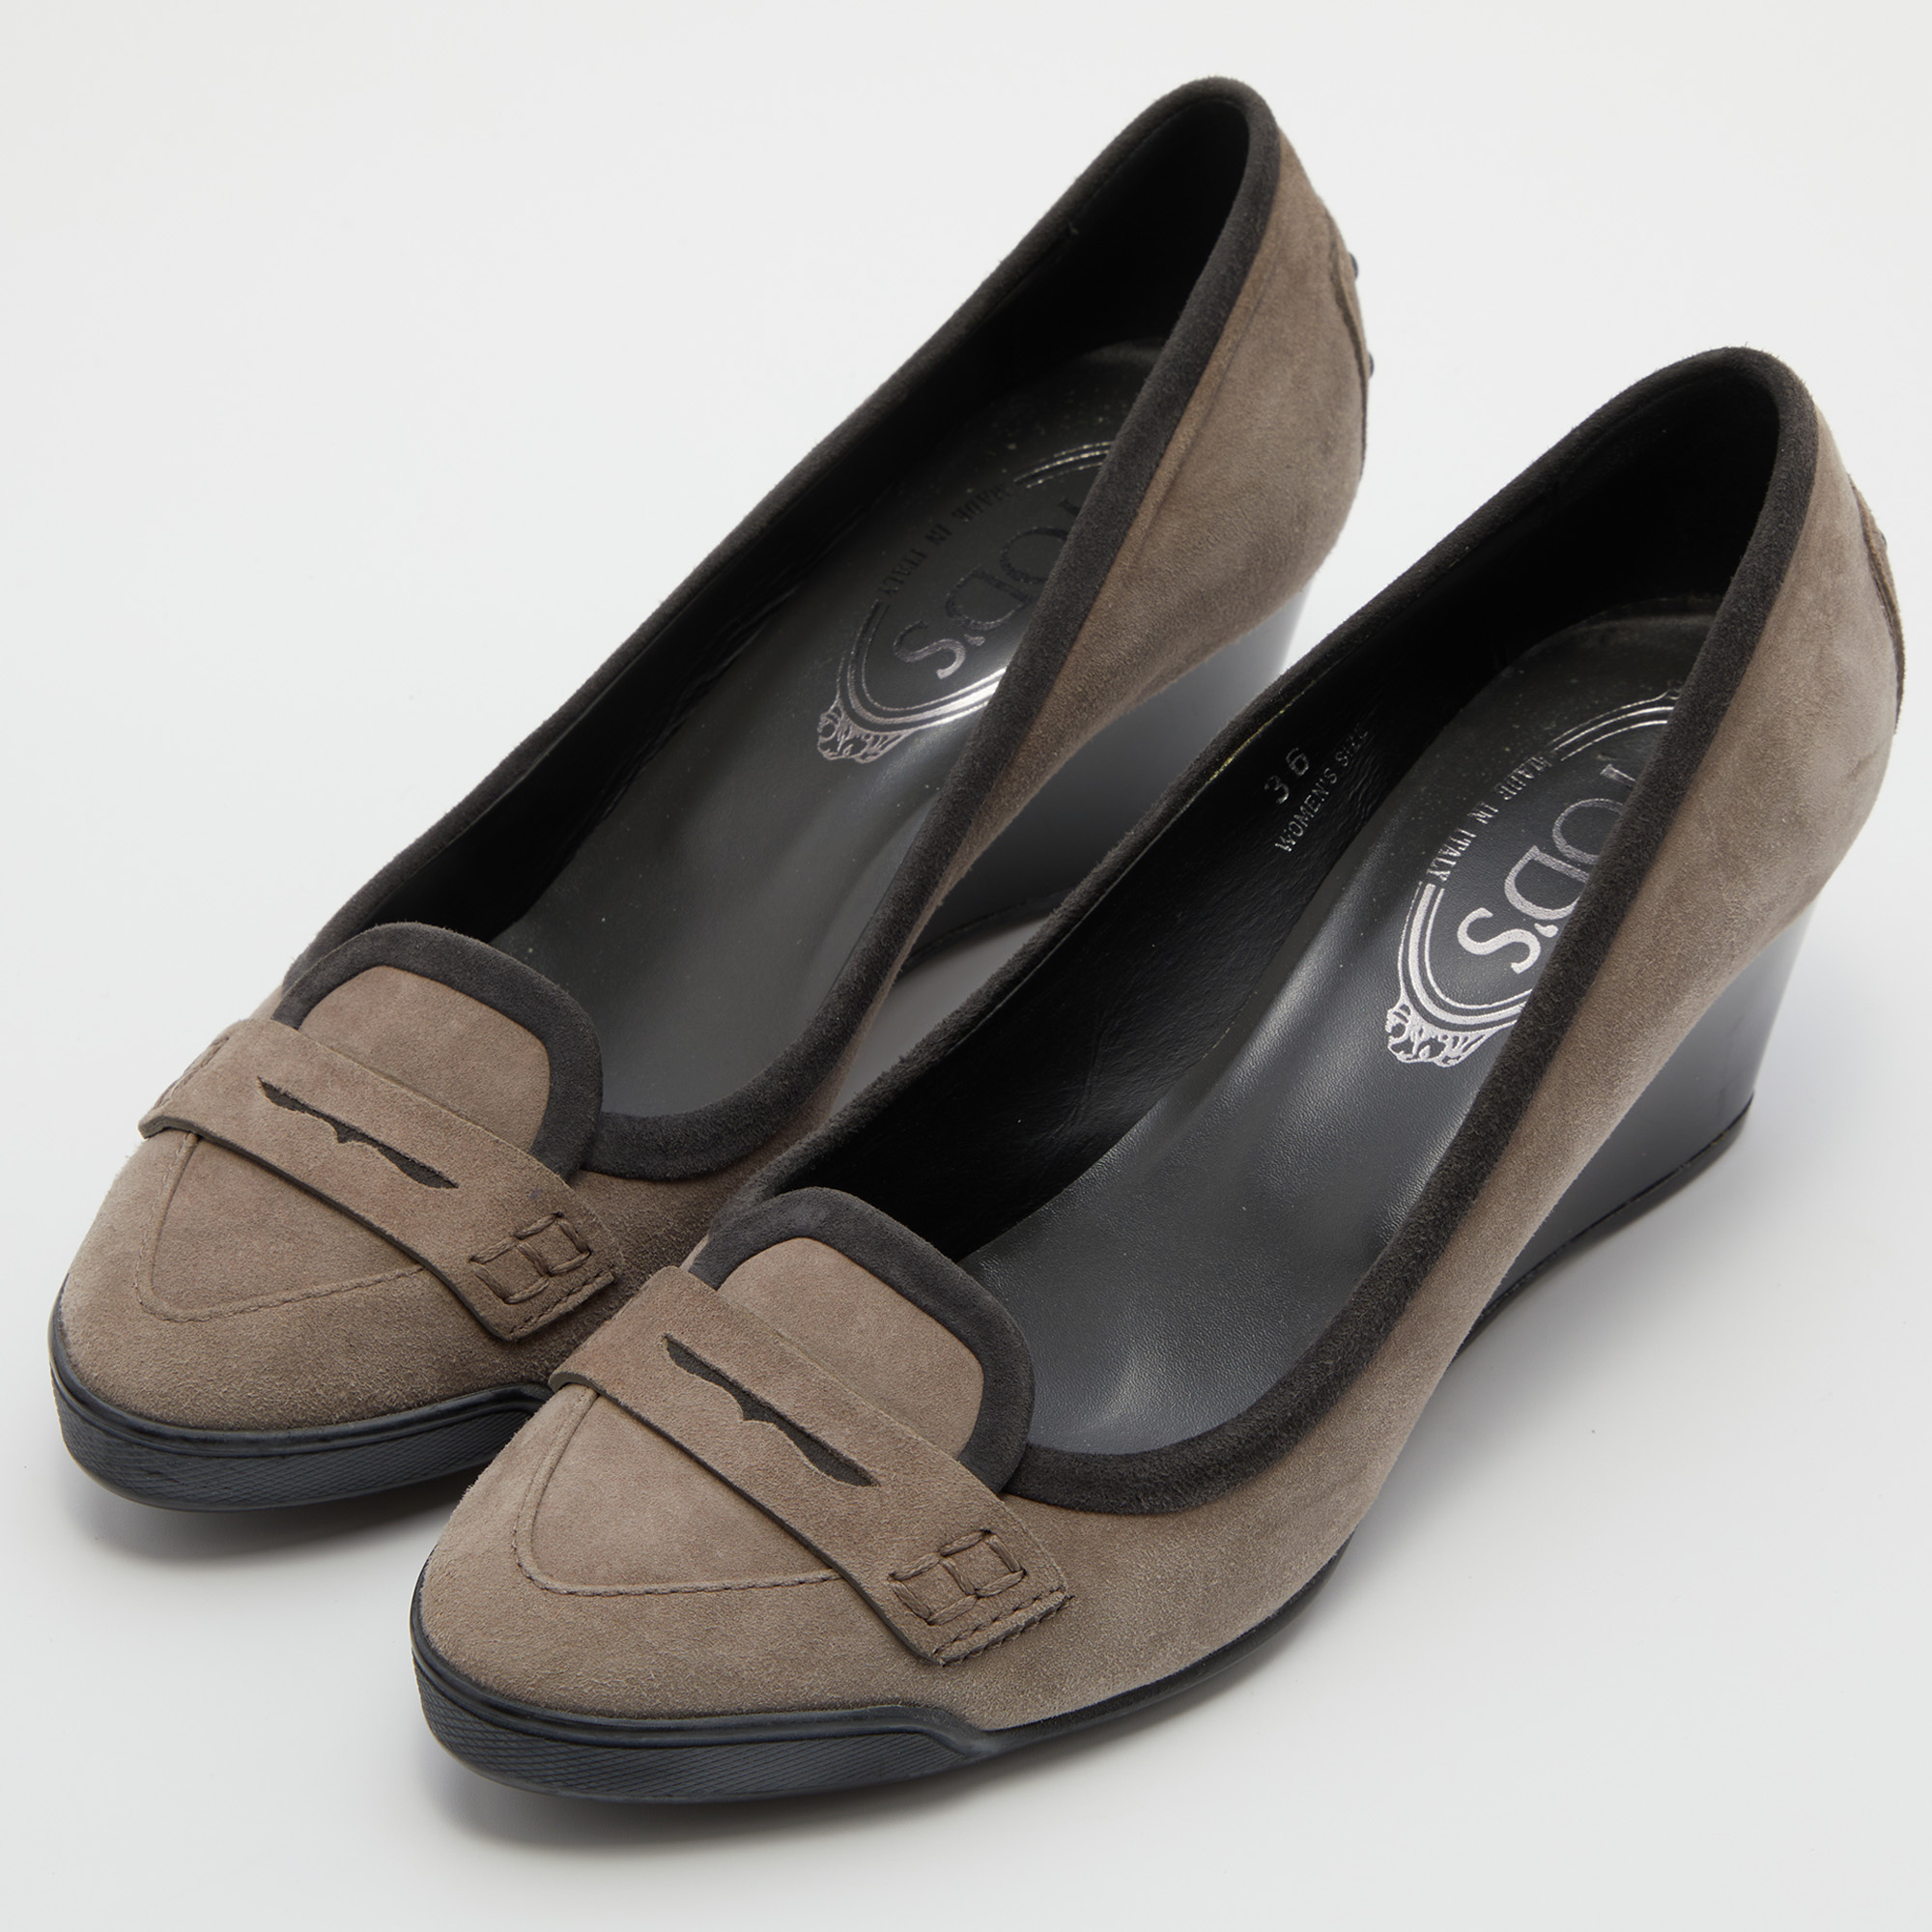 

Tod's Grey Suede Penny Loafer Wedge Pumps Size